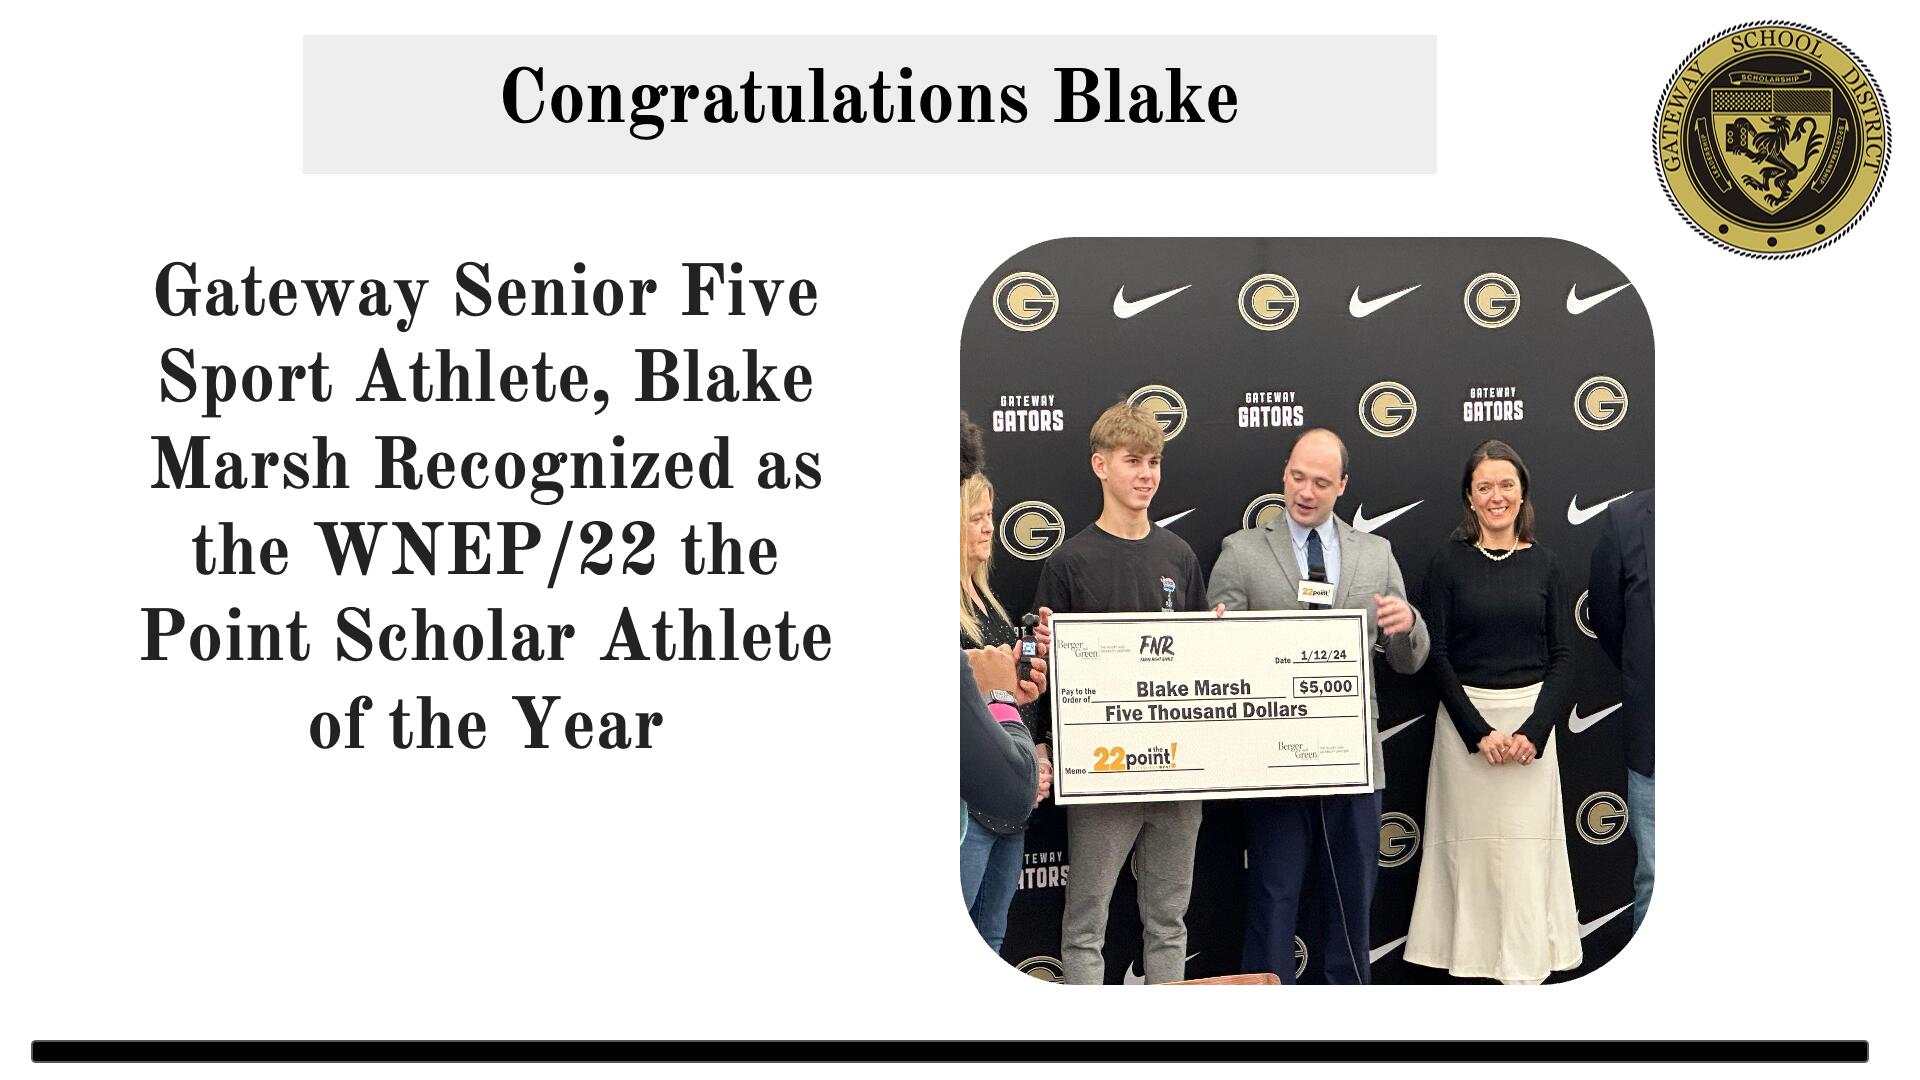 Congratulations Blake Gateway Senior Five Sport Athlete, Blake Marsh Recognized as the WNEP/22 the Point Scholar Athlete of the Year